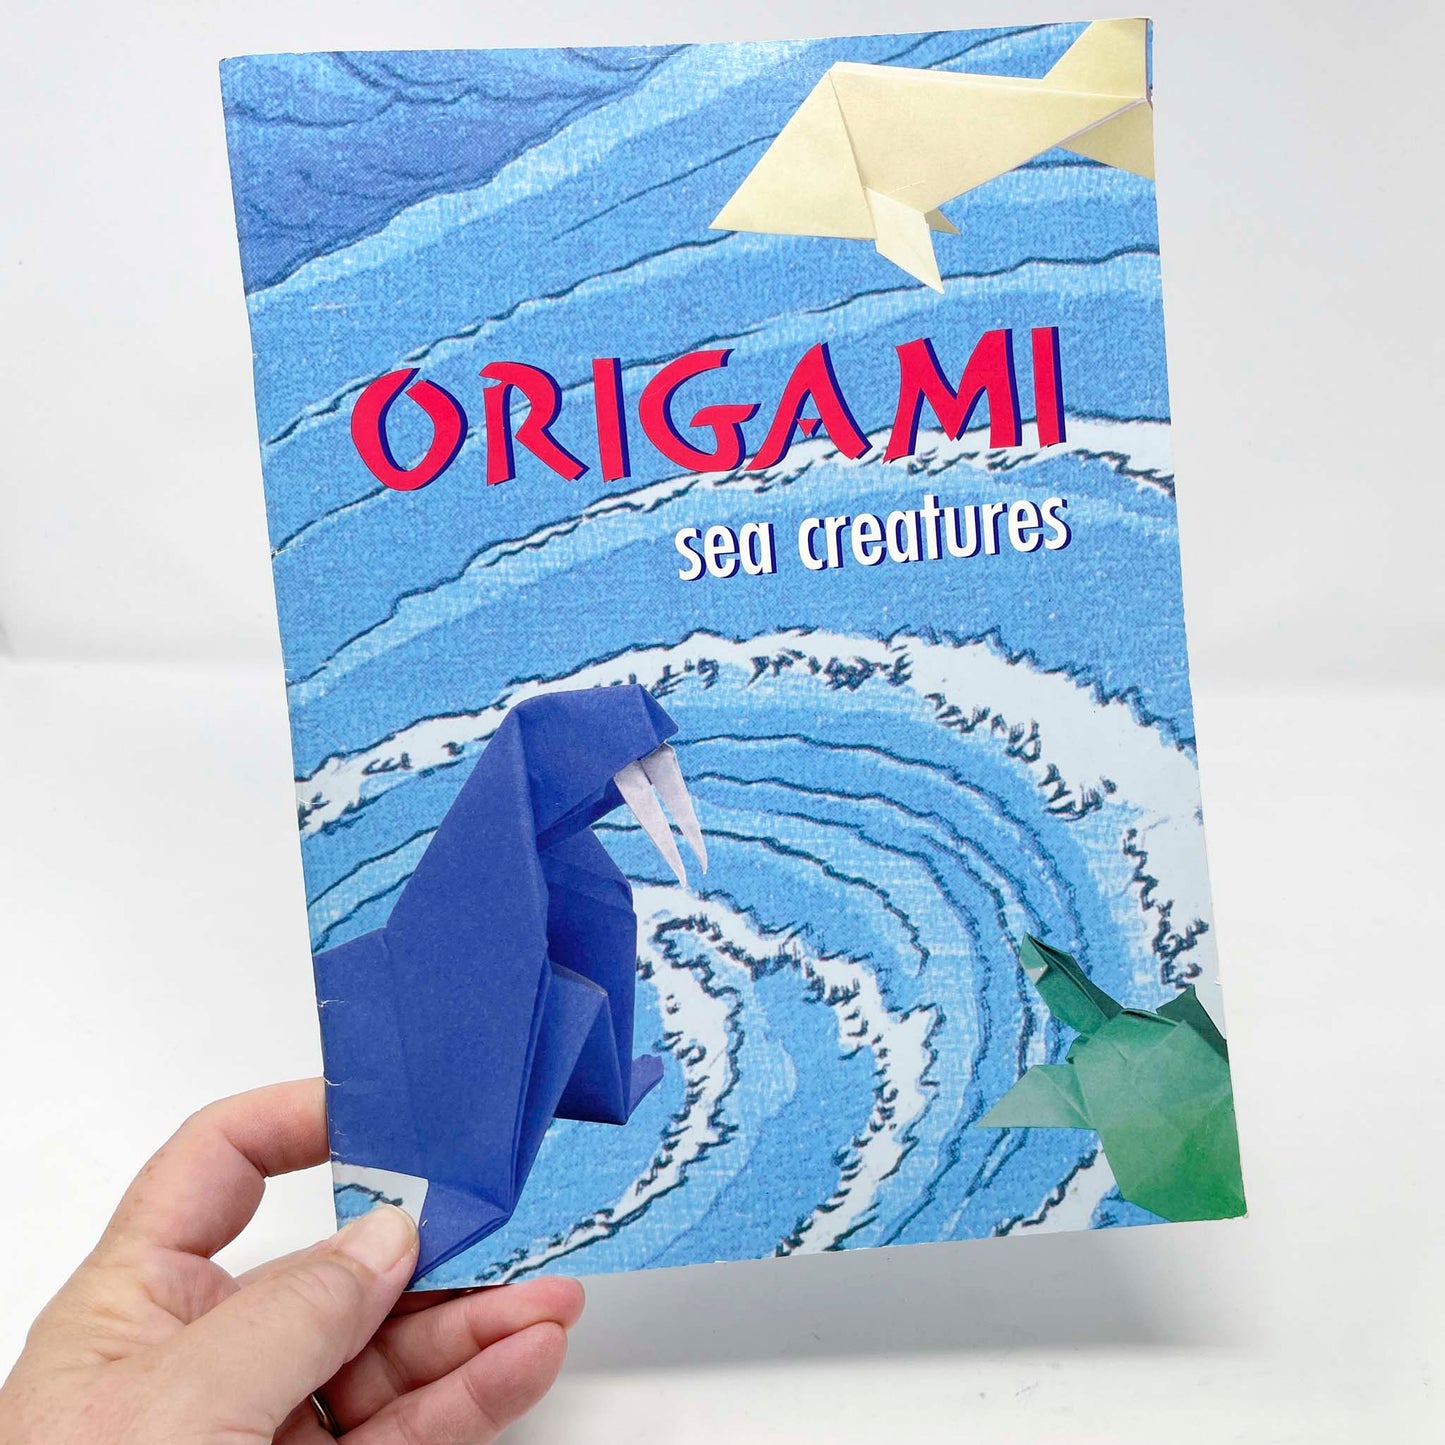 Origami Sea Creatures Book by John Montroll